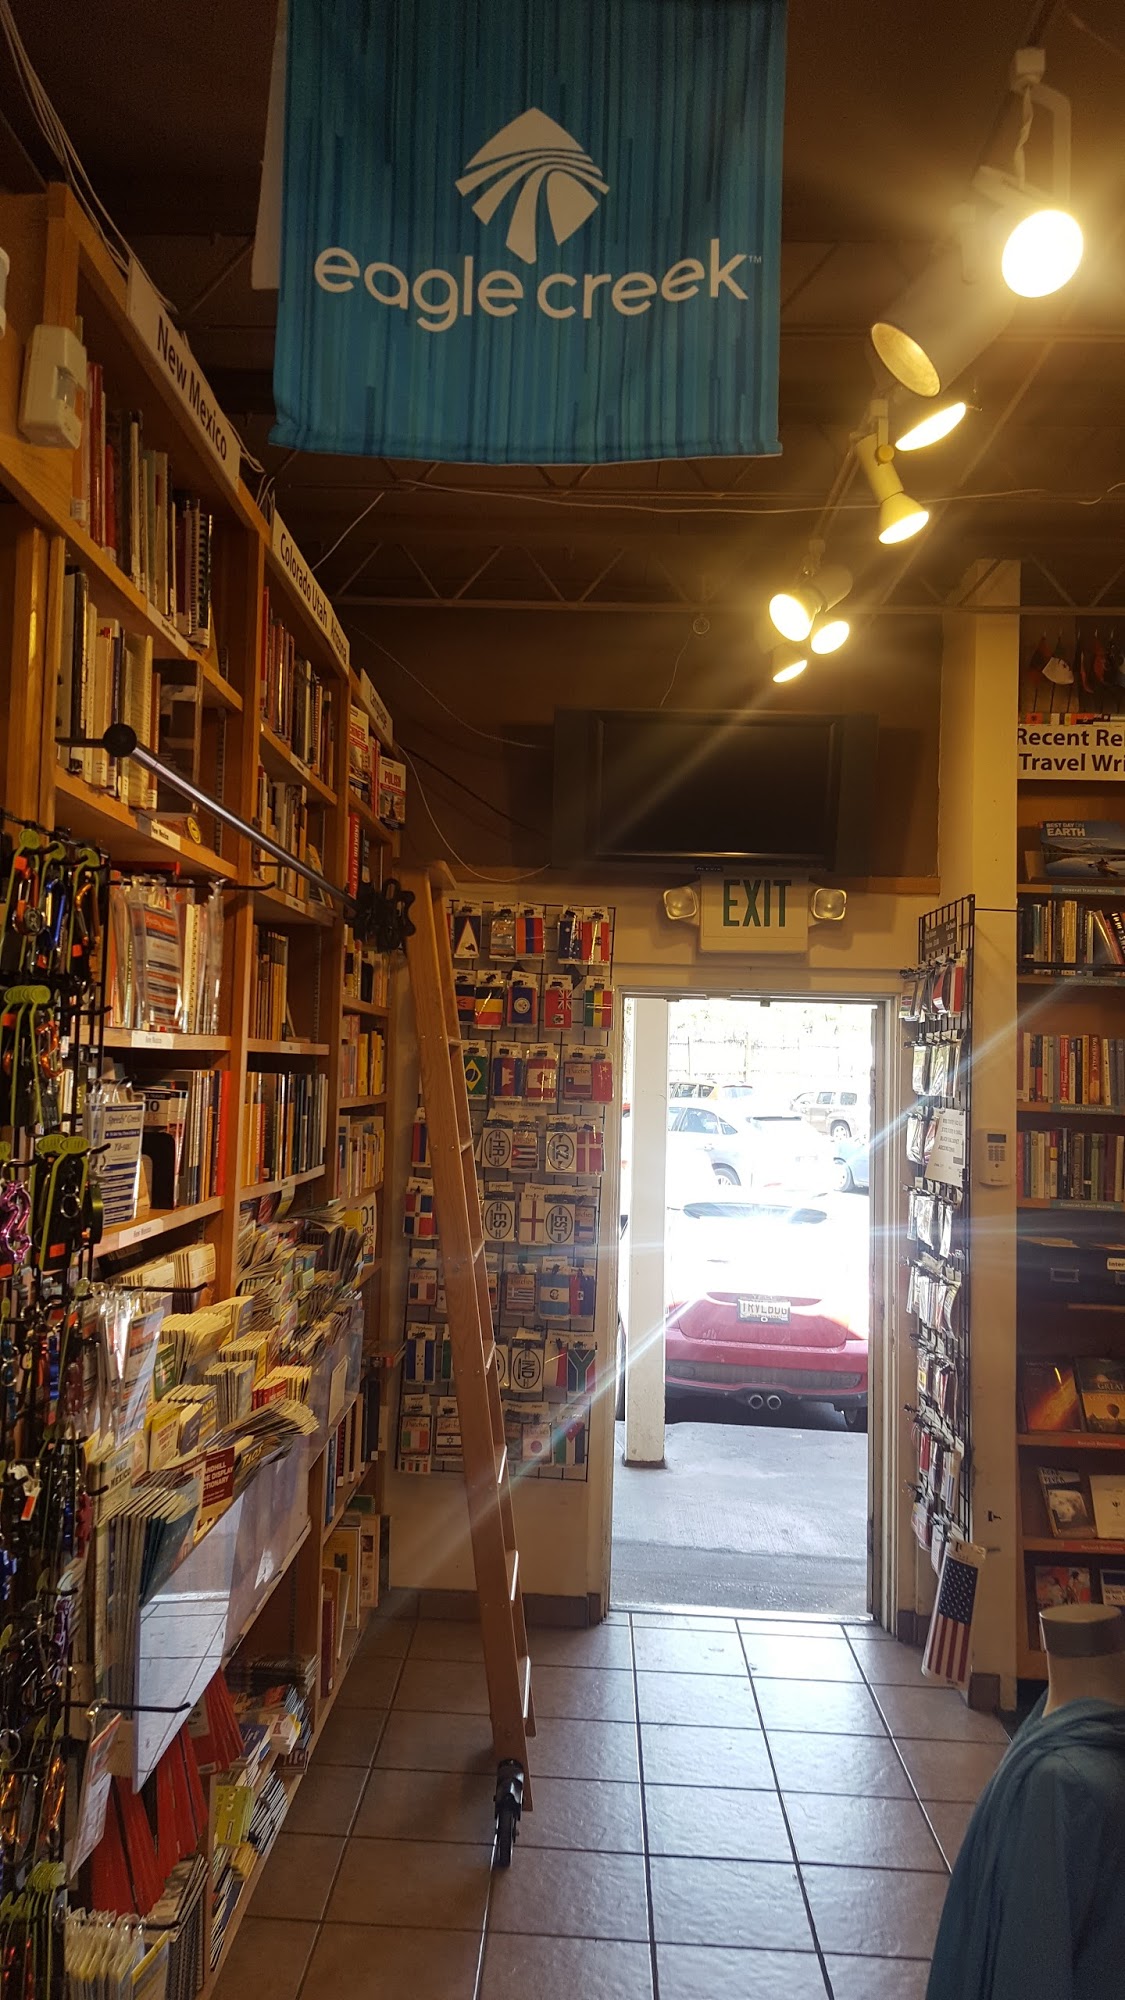 Travel Bug Specialty Book Store, Coffee Shop and Taproom